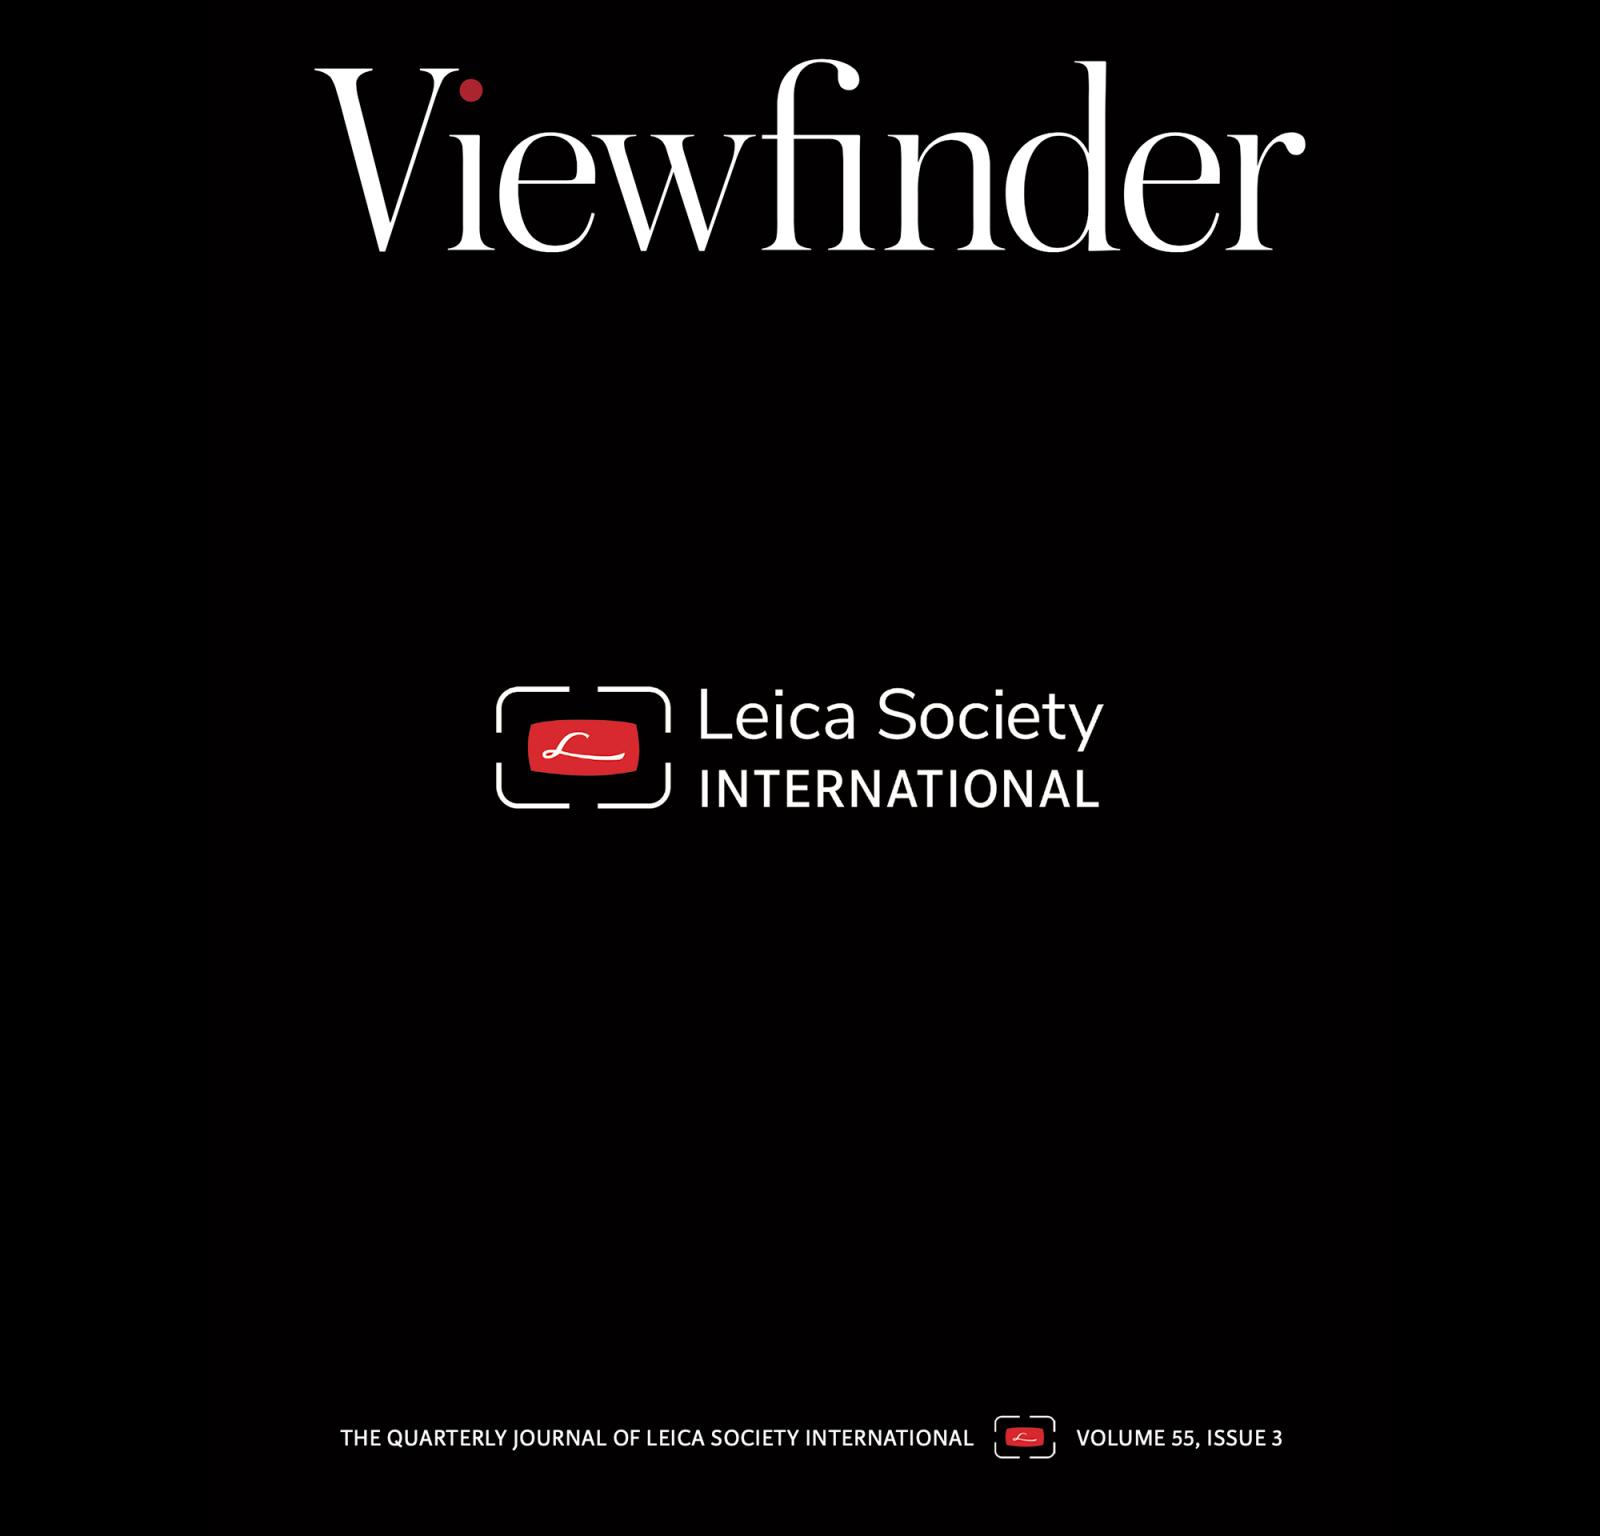 "Clash of Civilizations" was featured in Viewfinder, the Quarterly Journal of LSI - Leica Society International